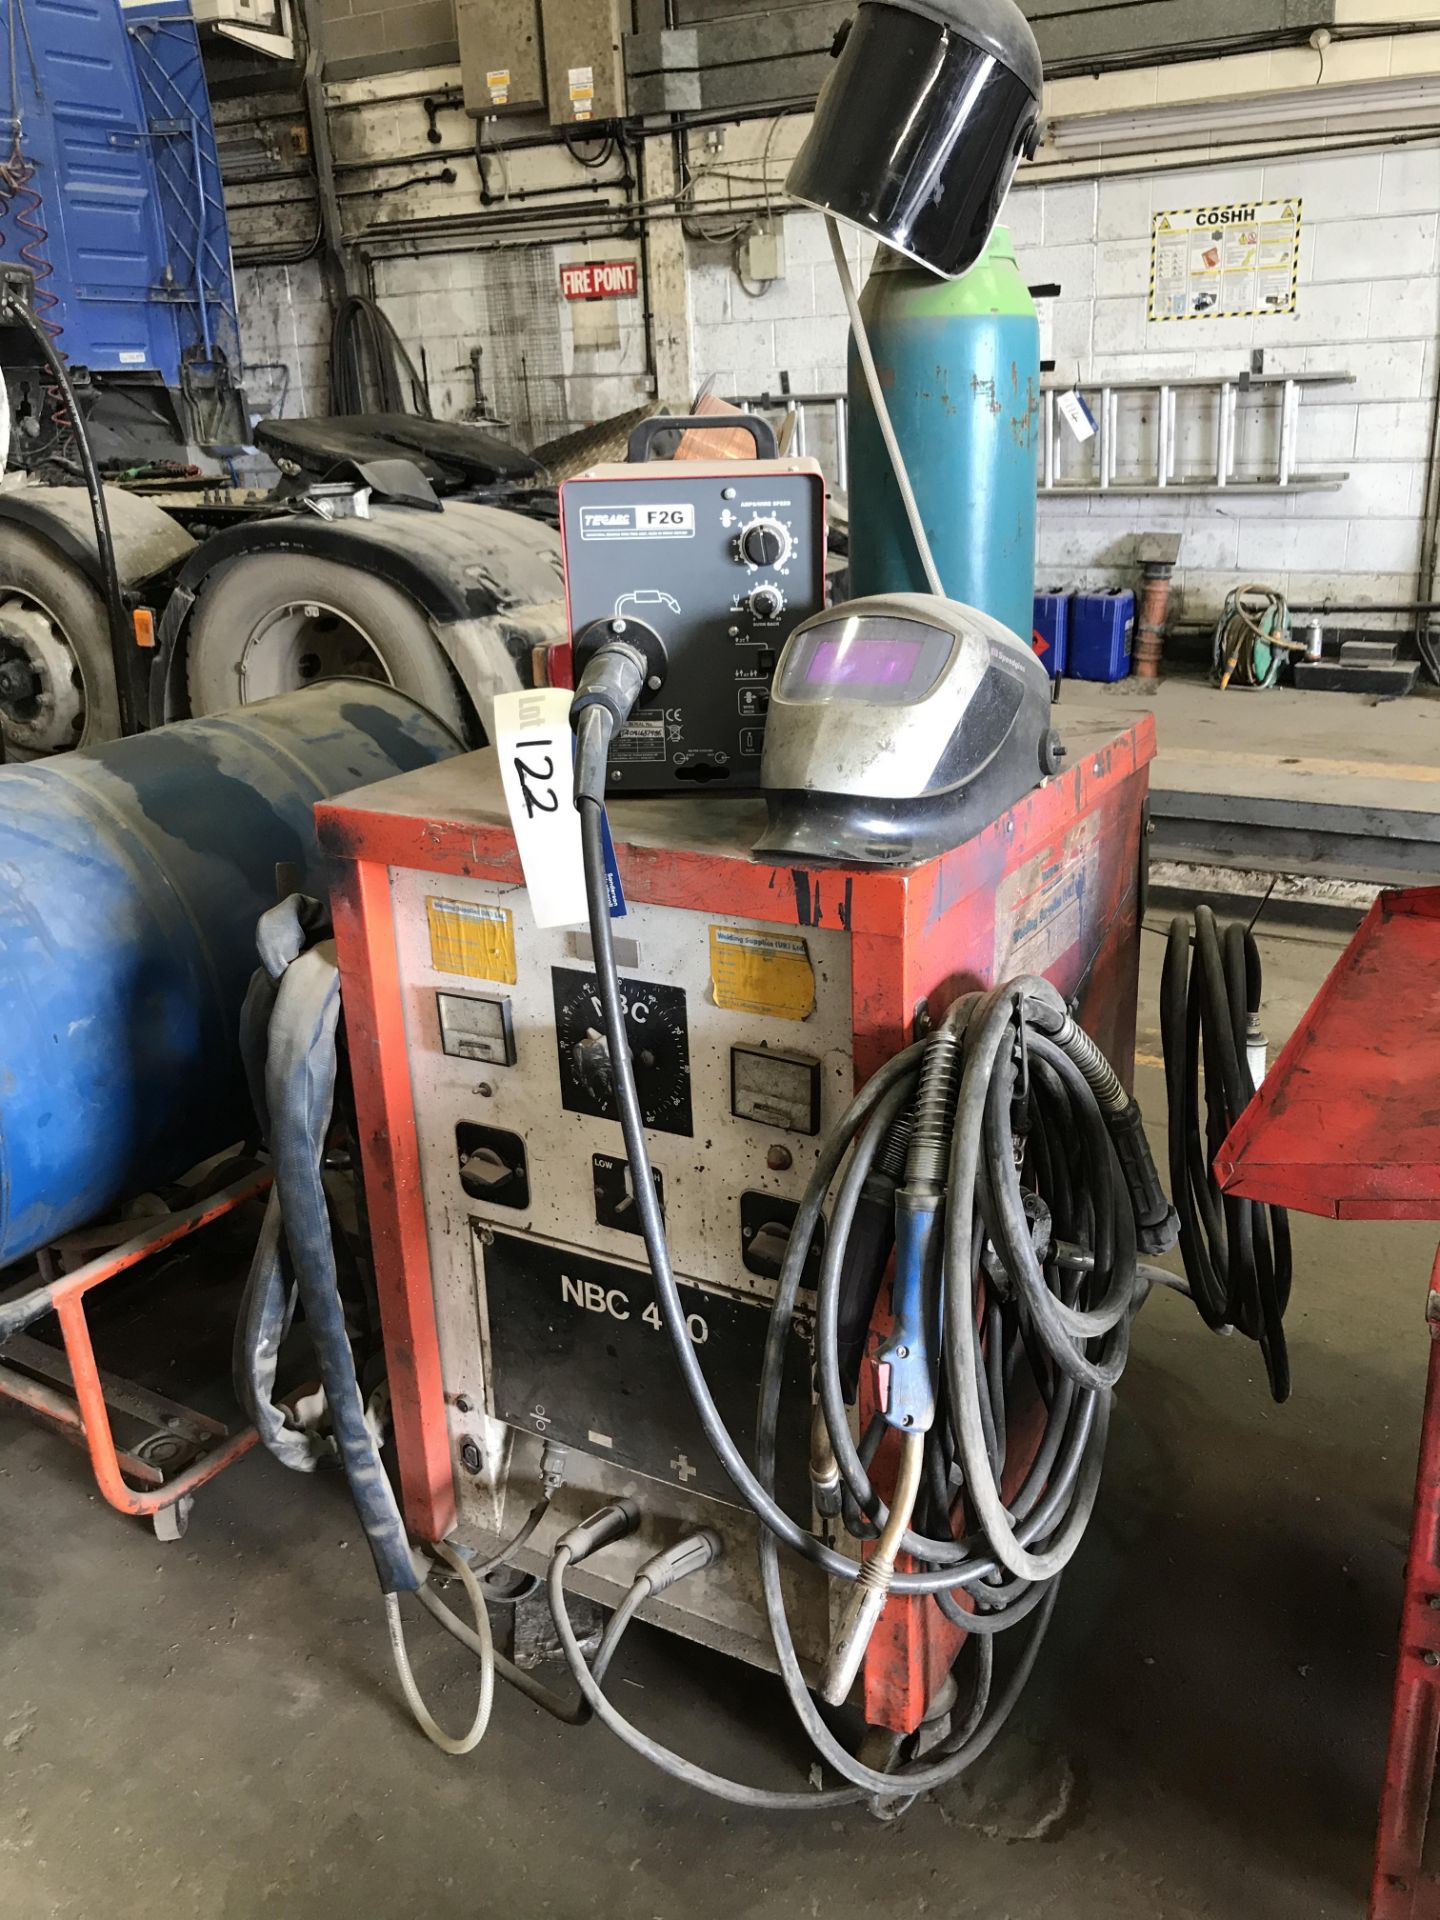 NBC 400 Mig Welder Set, with Tecarc F2G twin roll wire feed unit, two Binzel mig torches and welding - Image 2 of 5